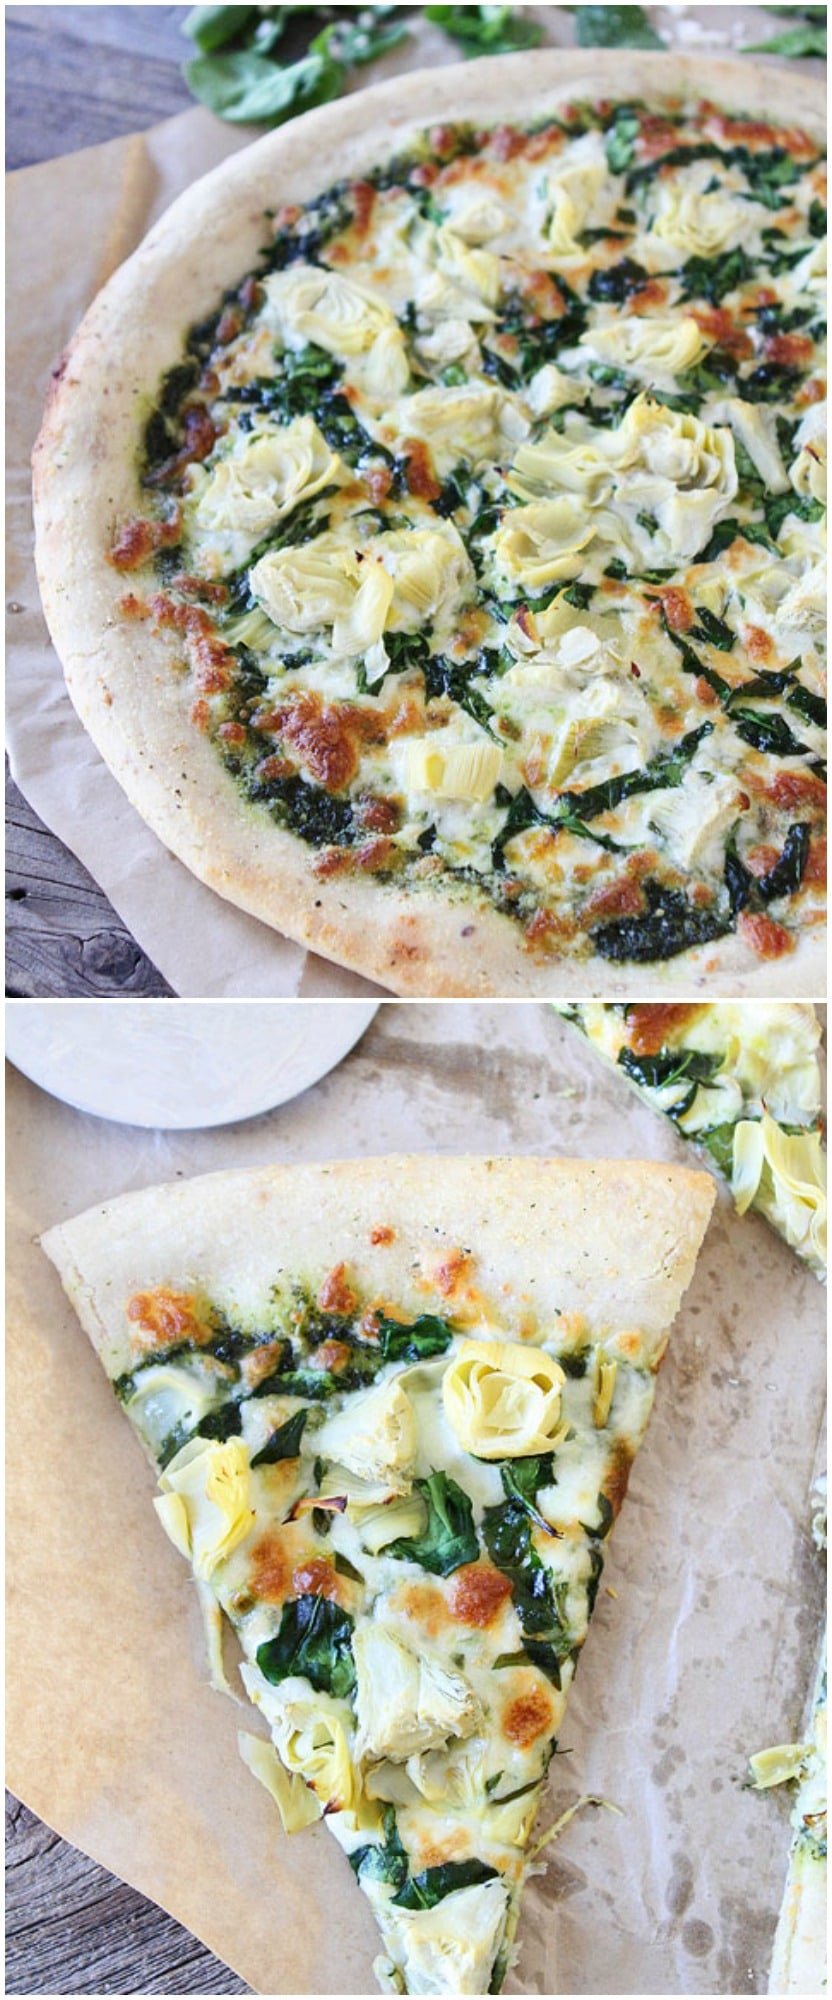 Spinach Artichoke Pesto Pizza on twopeasandtheirpod.com One of my all-time favorite pizzas! 